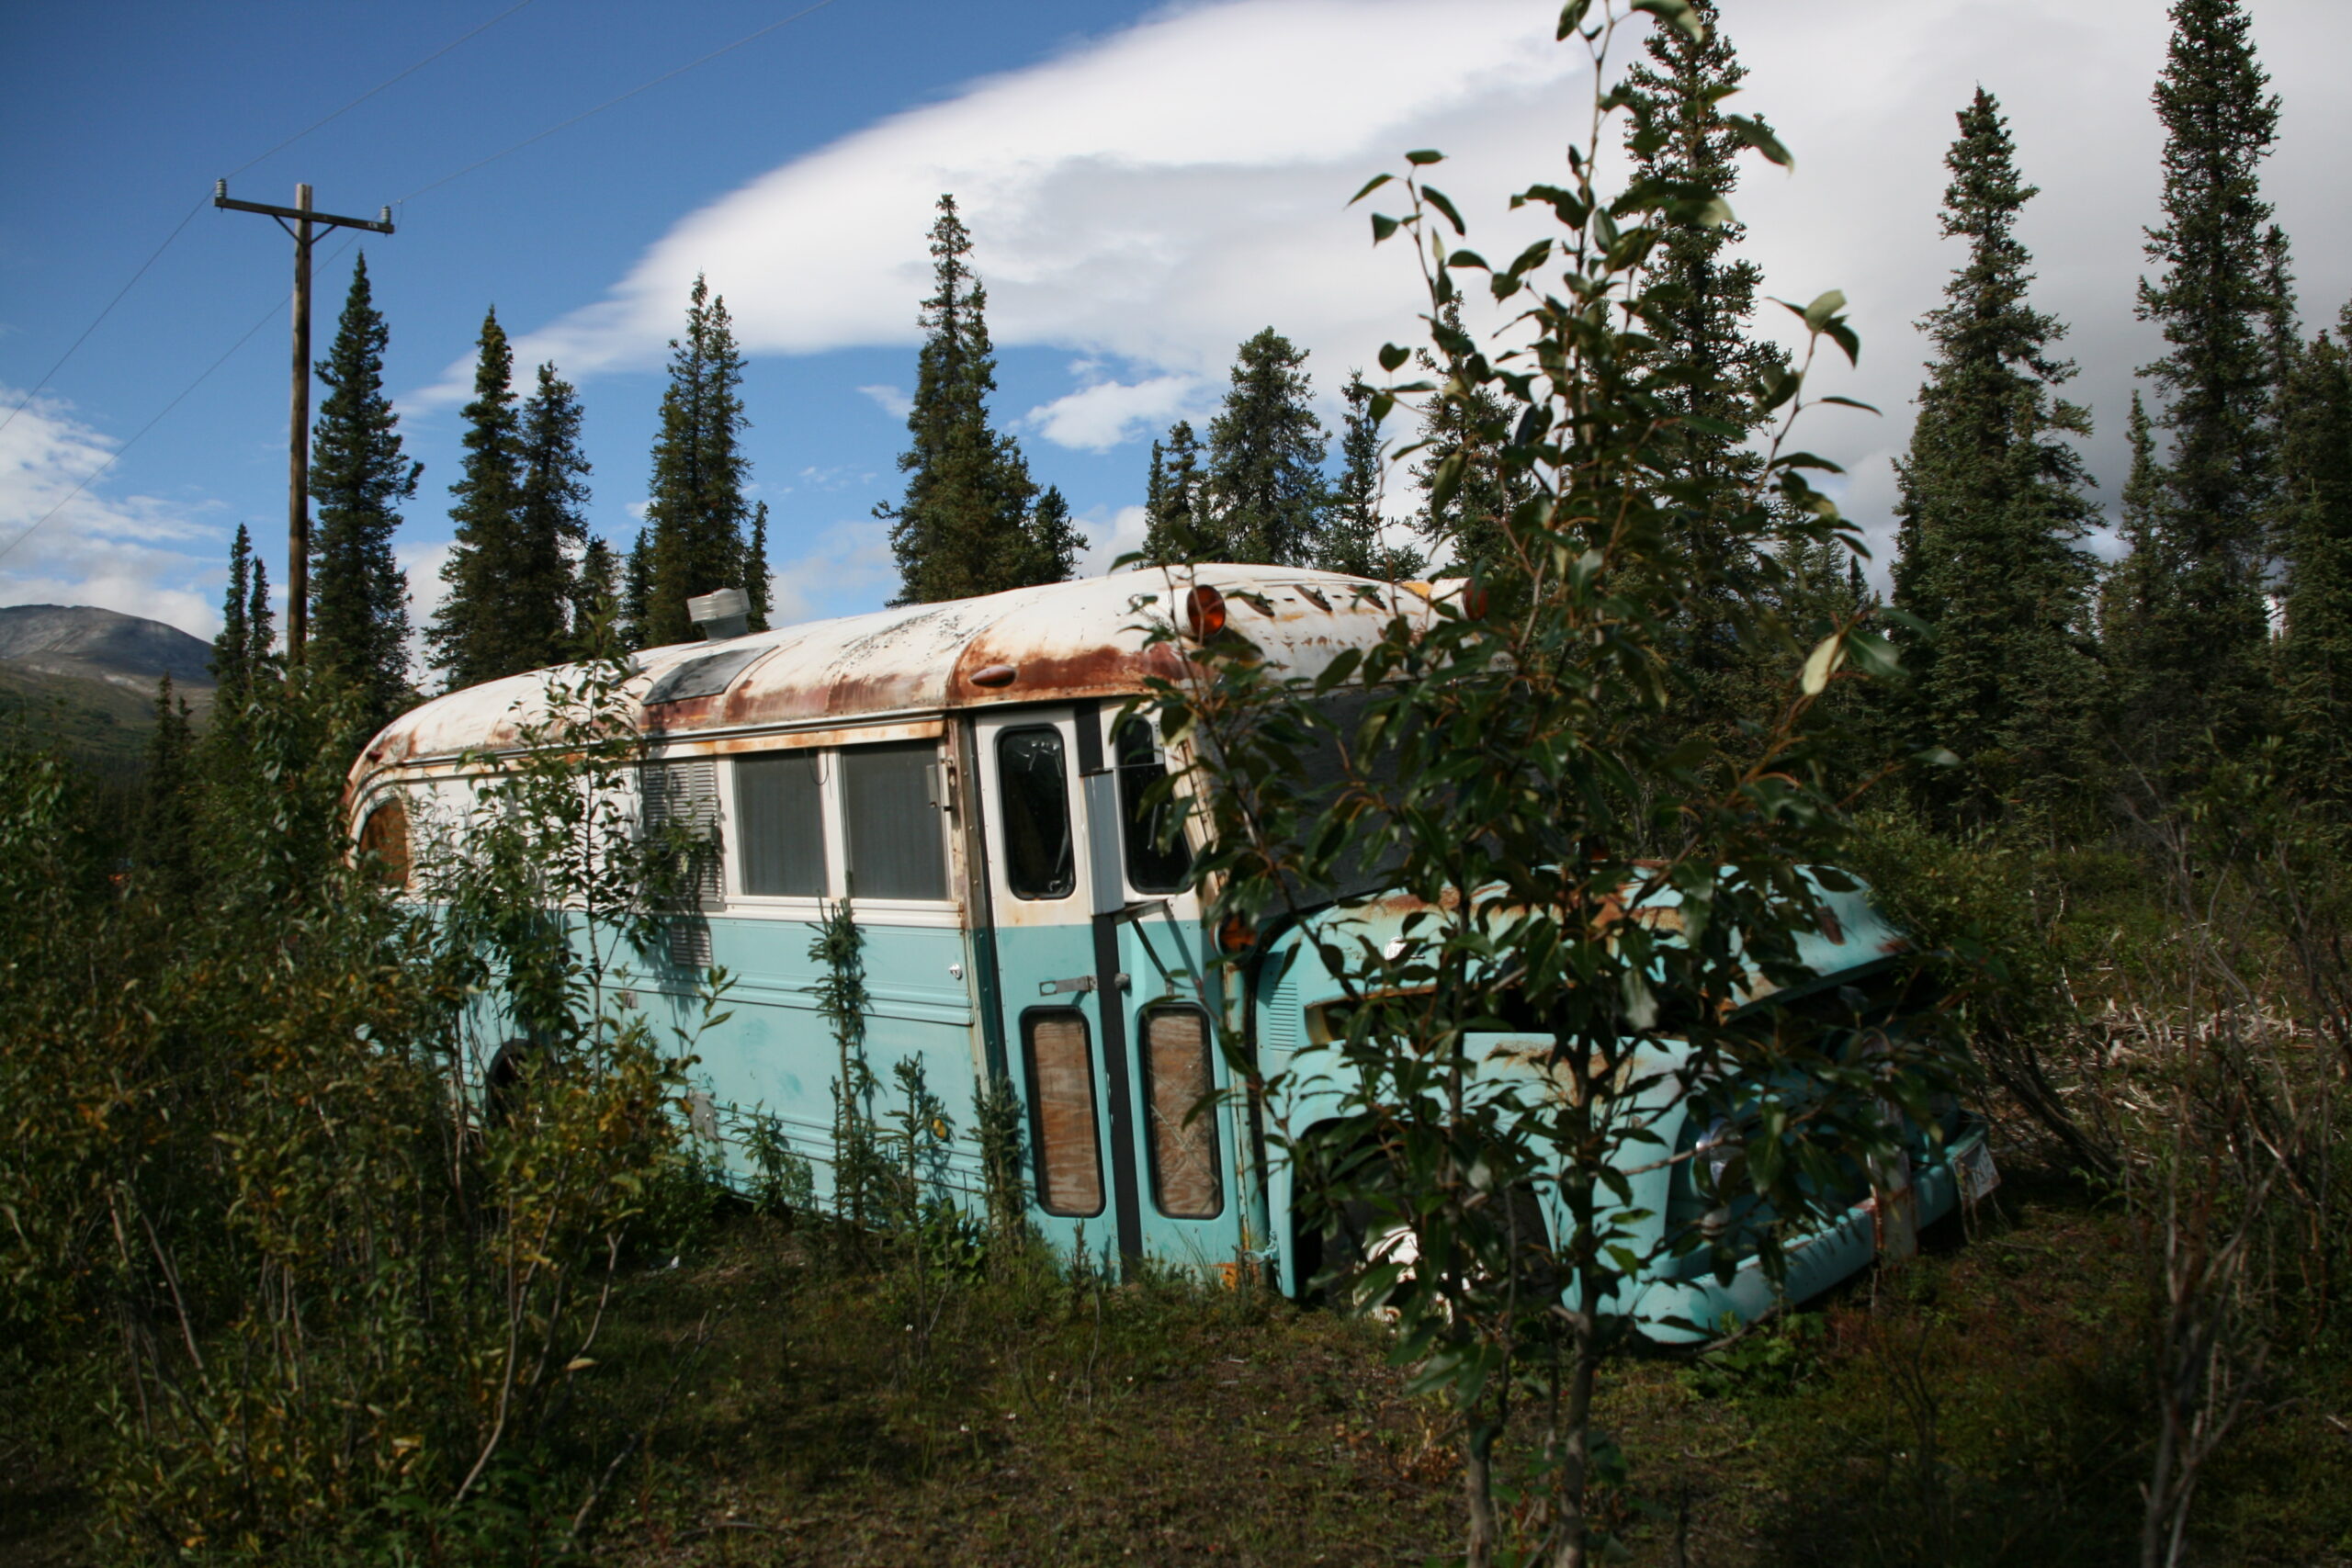 The prop bus used in lieu of the "Magic Bus" in Into the Wild sits near Cantwell, Alaska.